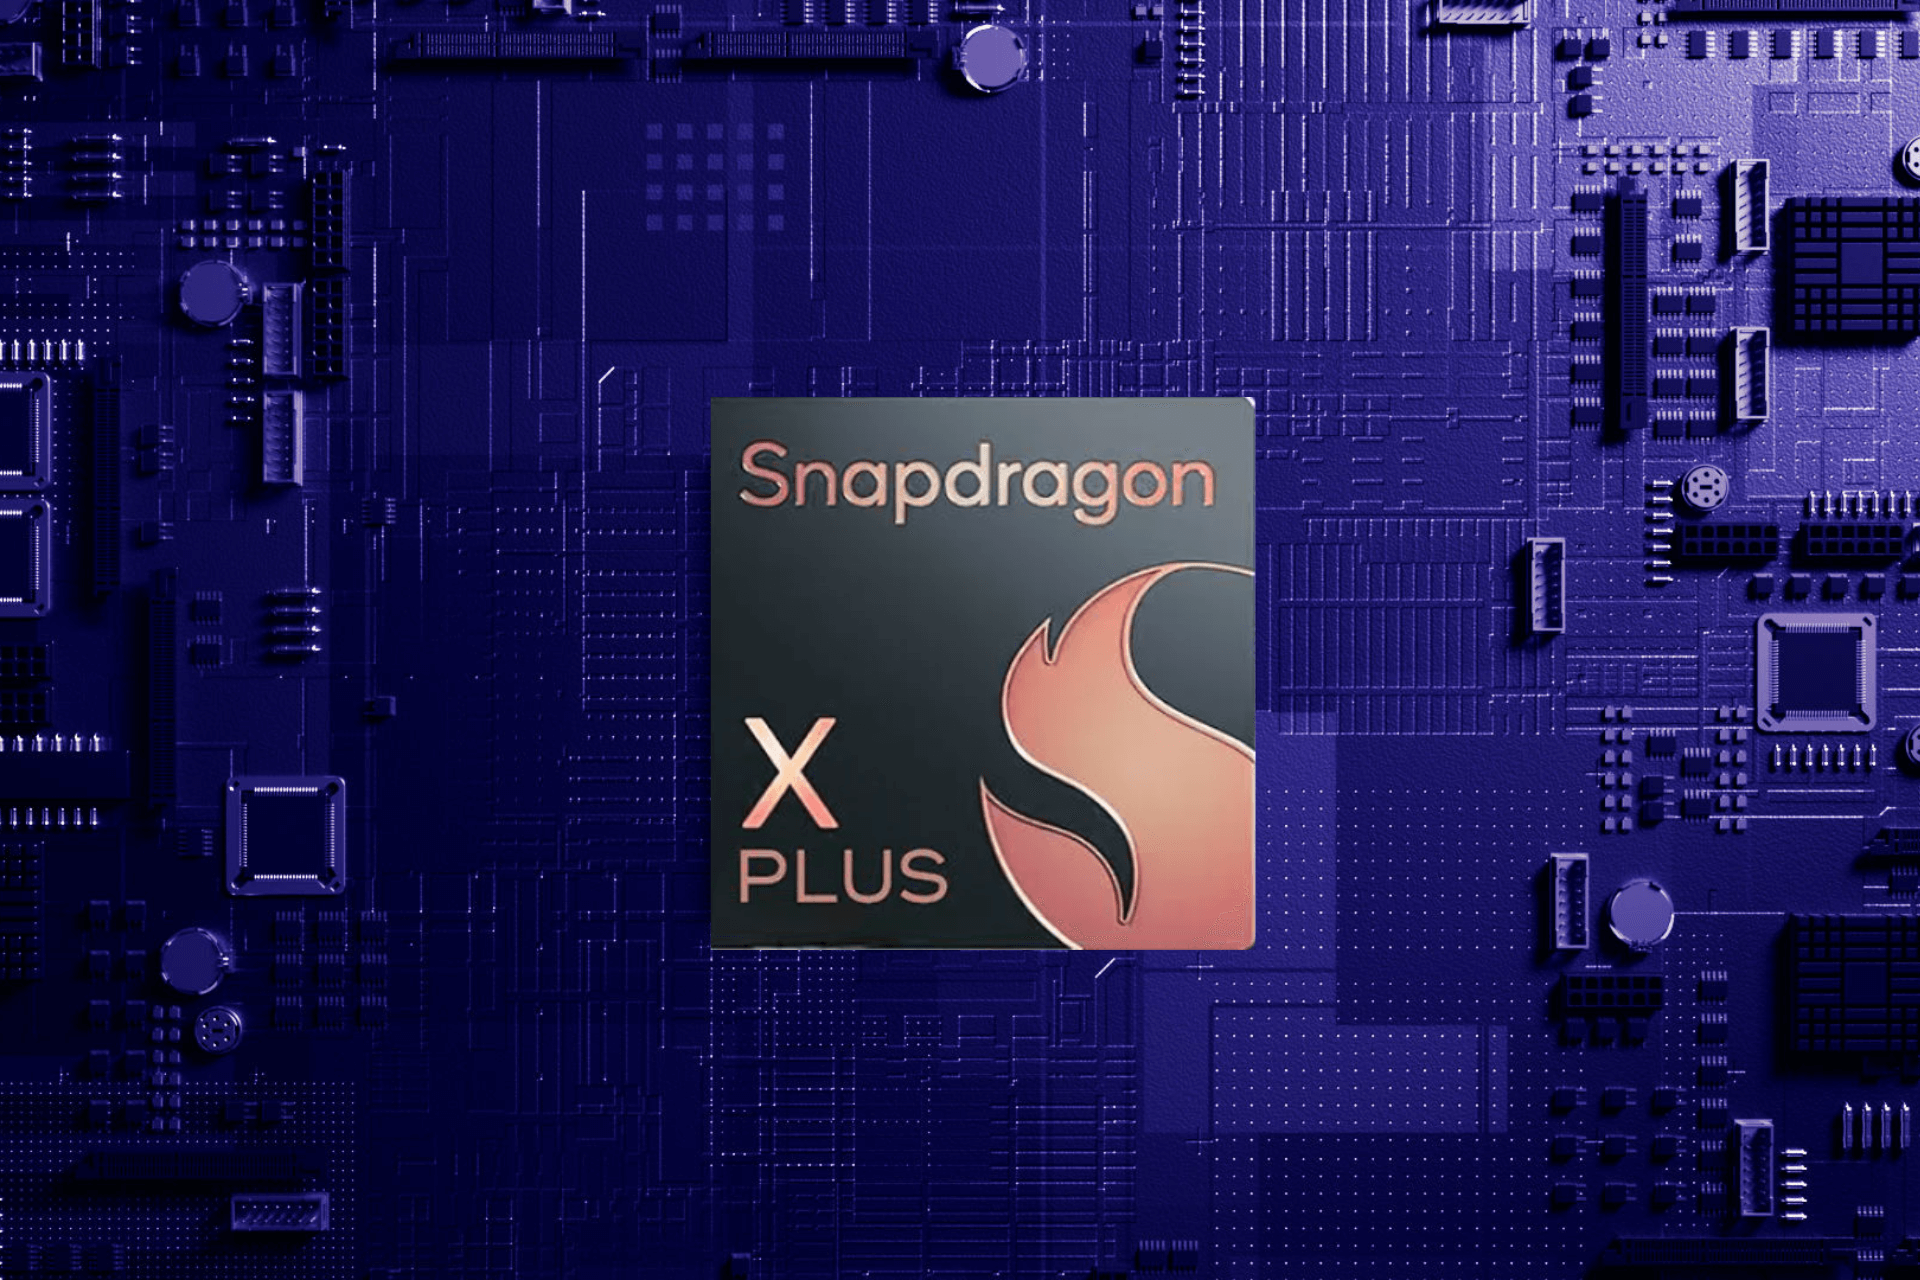 Lower-end Windows 11 on ARM PCs may use another Snapdragon X chip